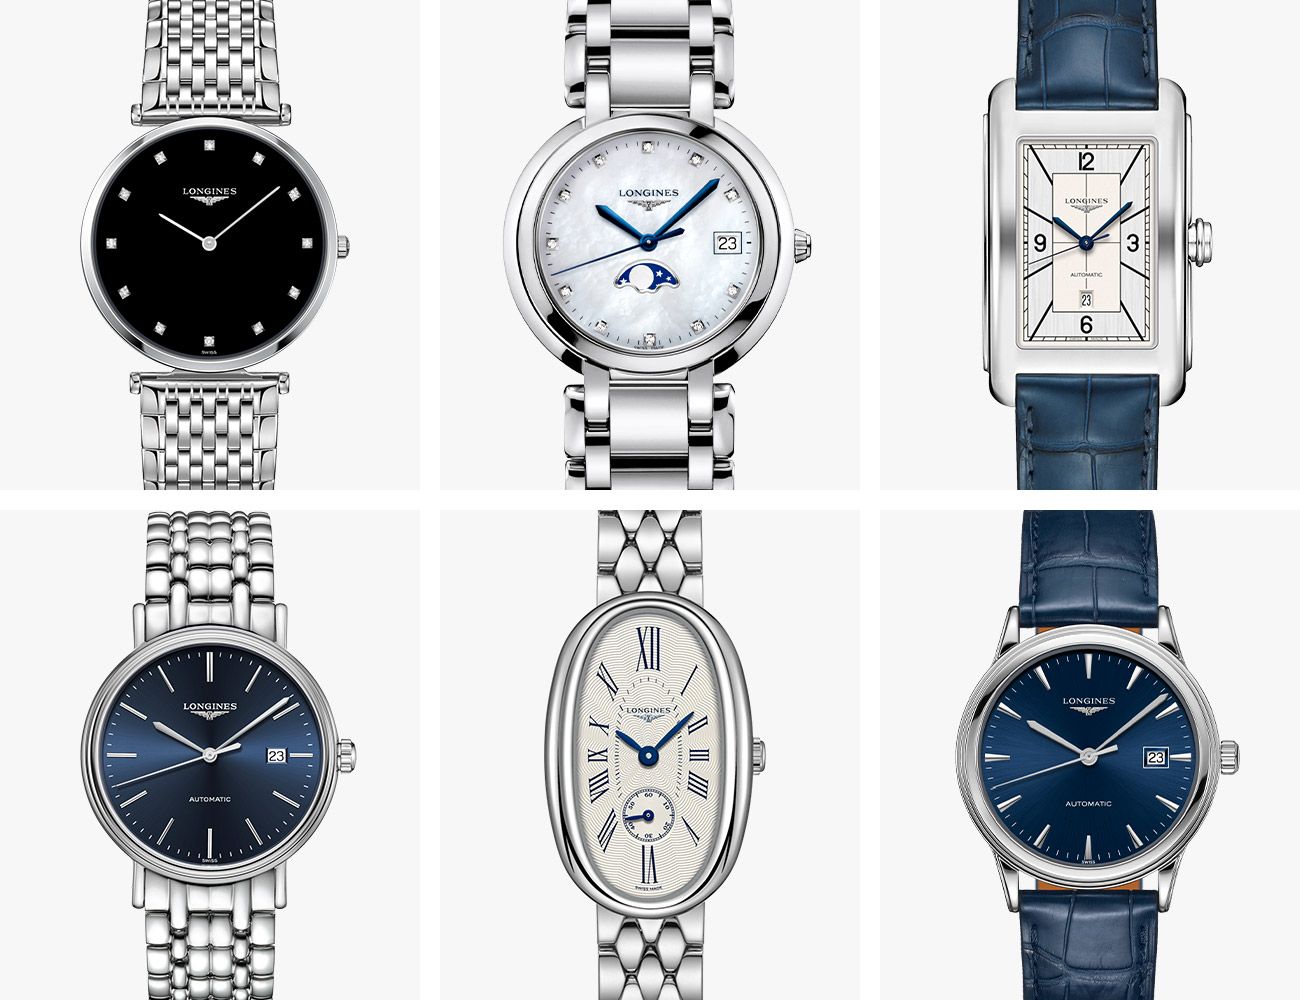 Replica Longines Watches For Mens